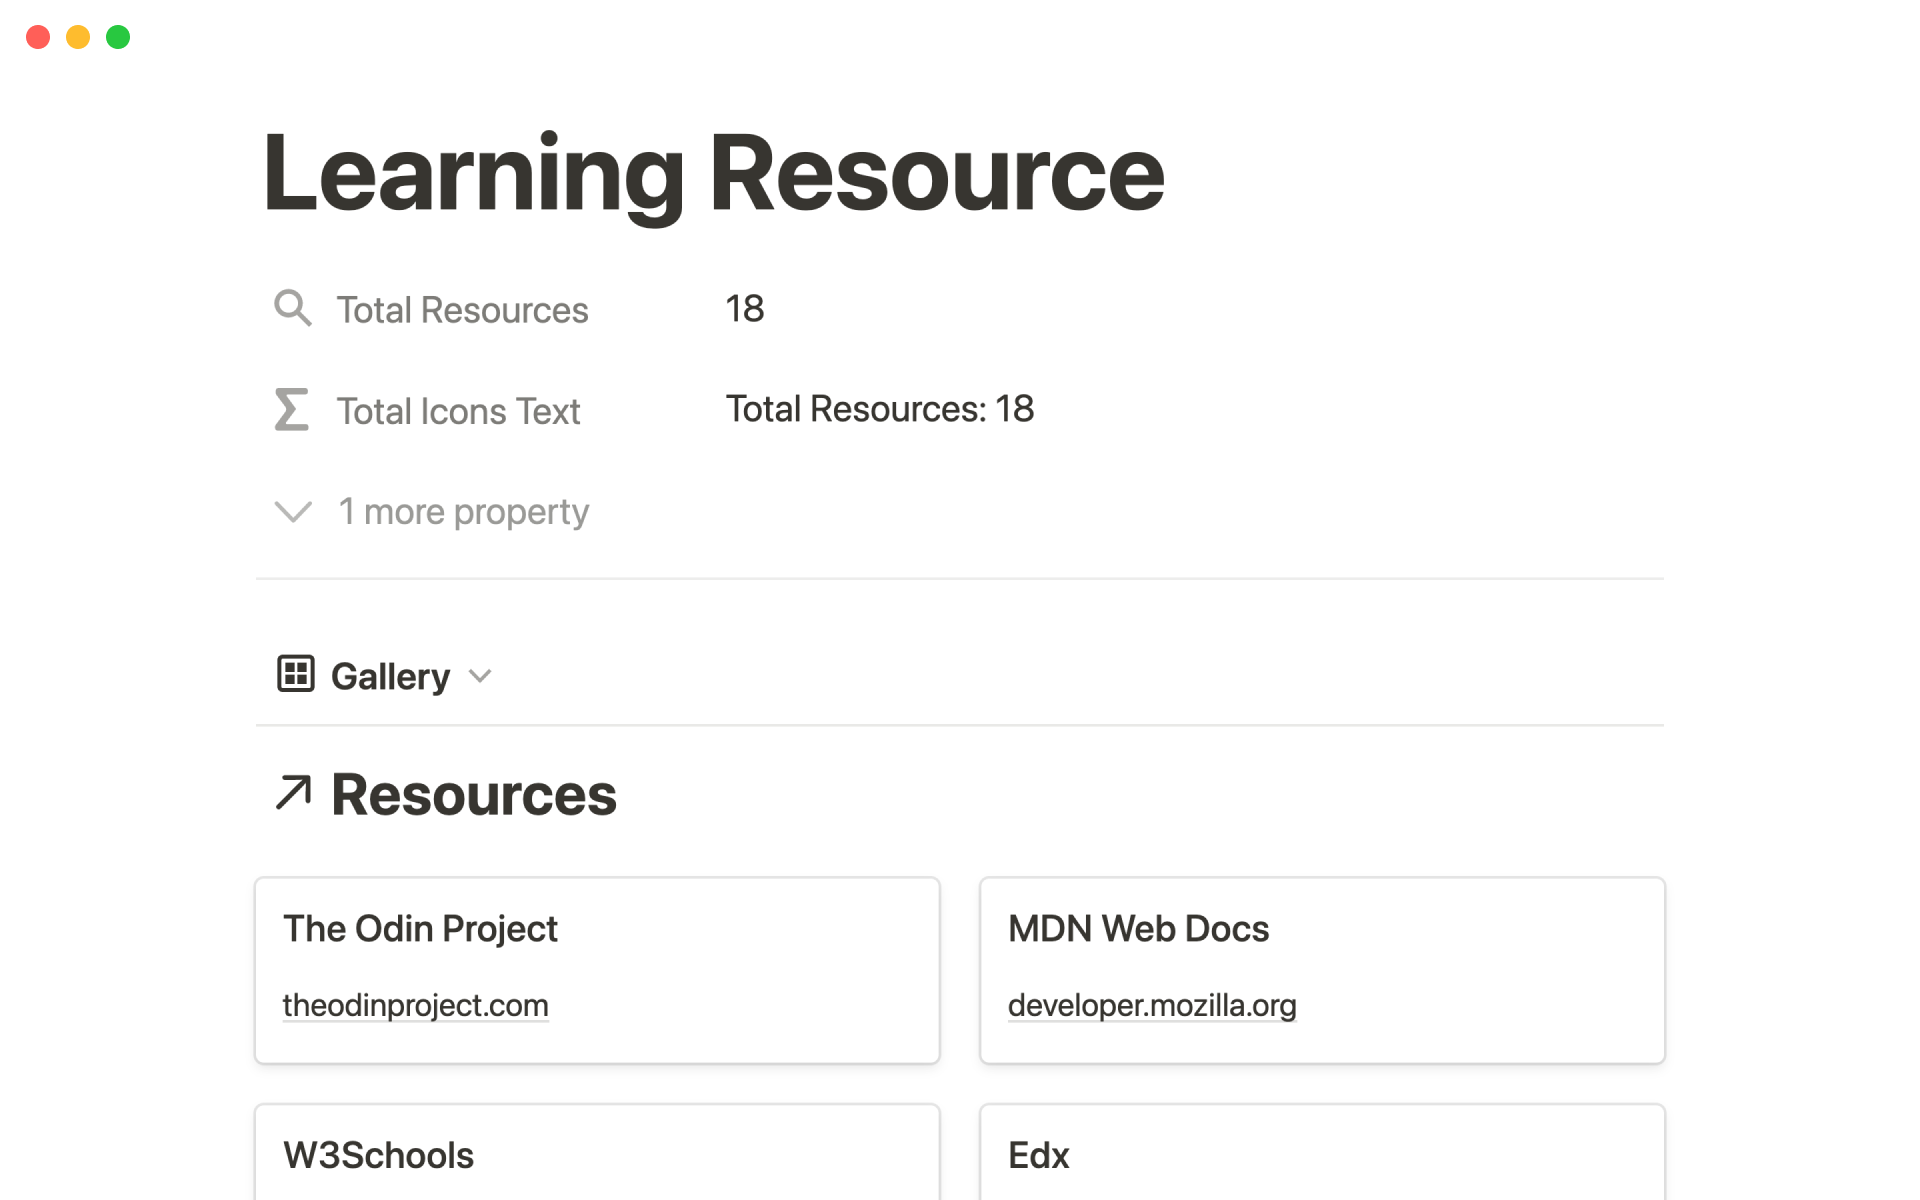 A curated database of over 100+ resources that can help any developer.